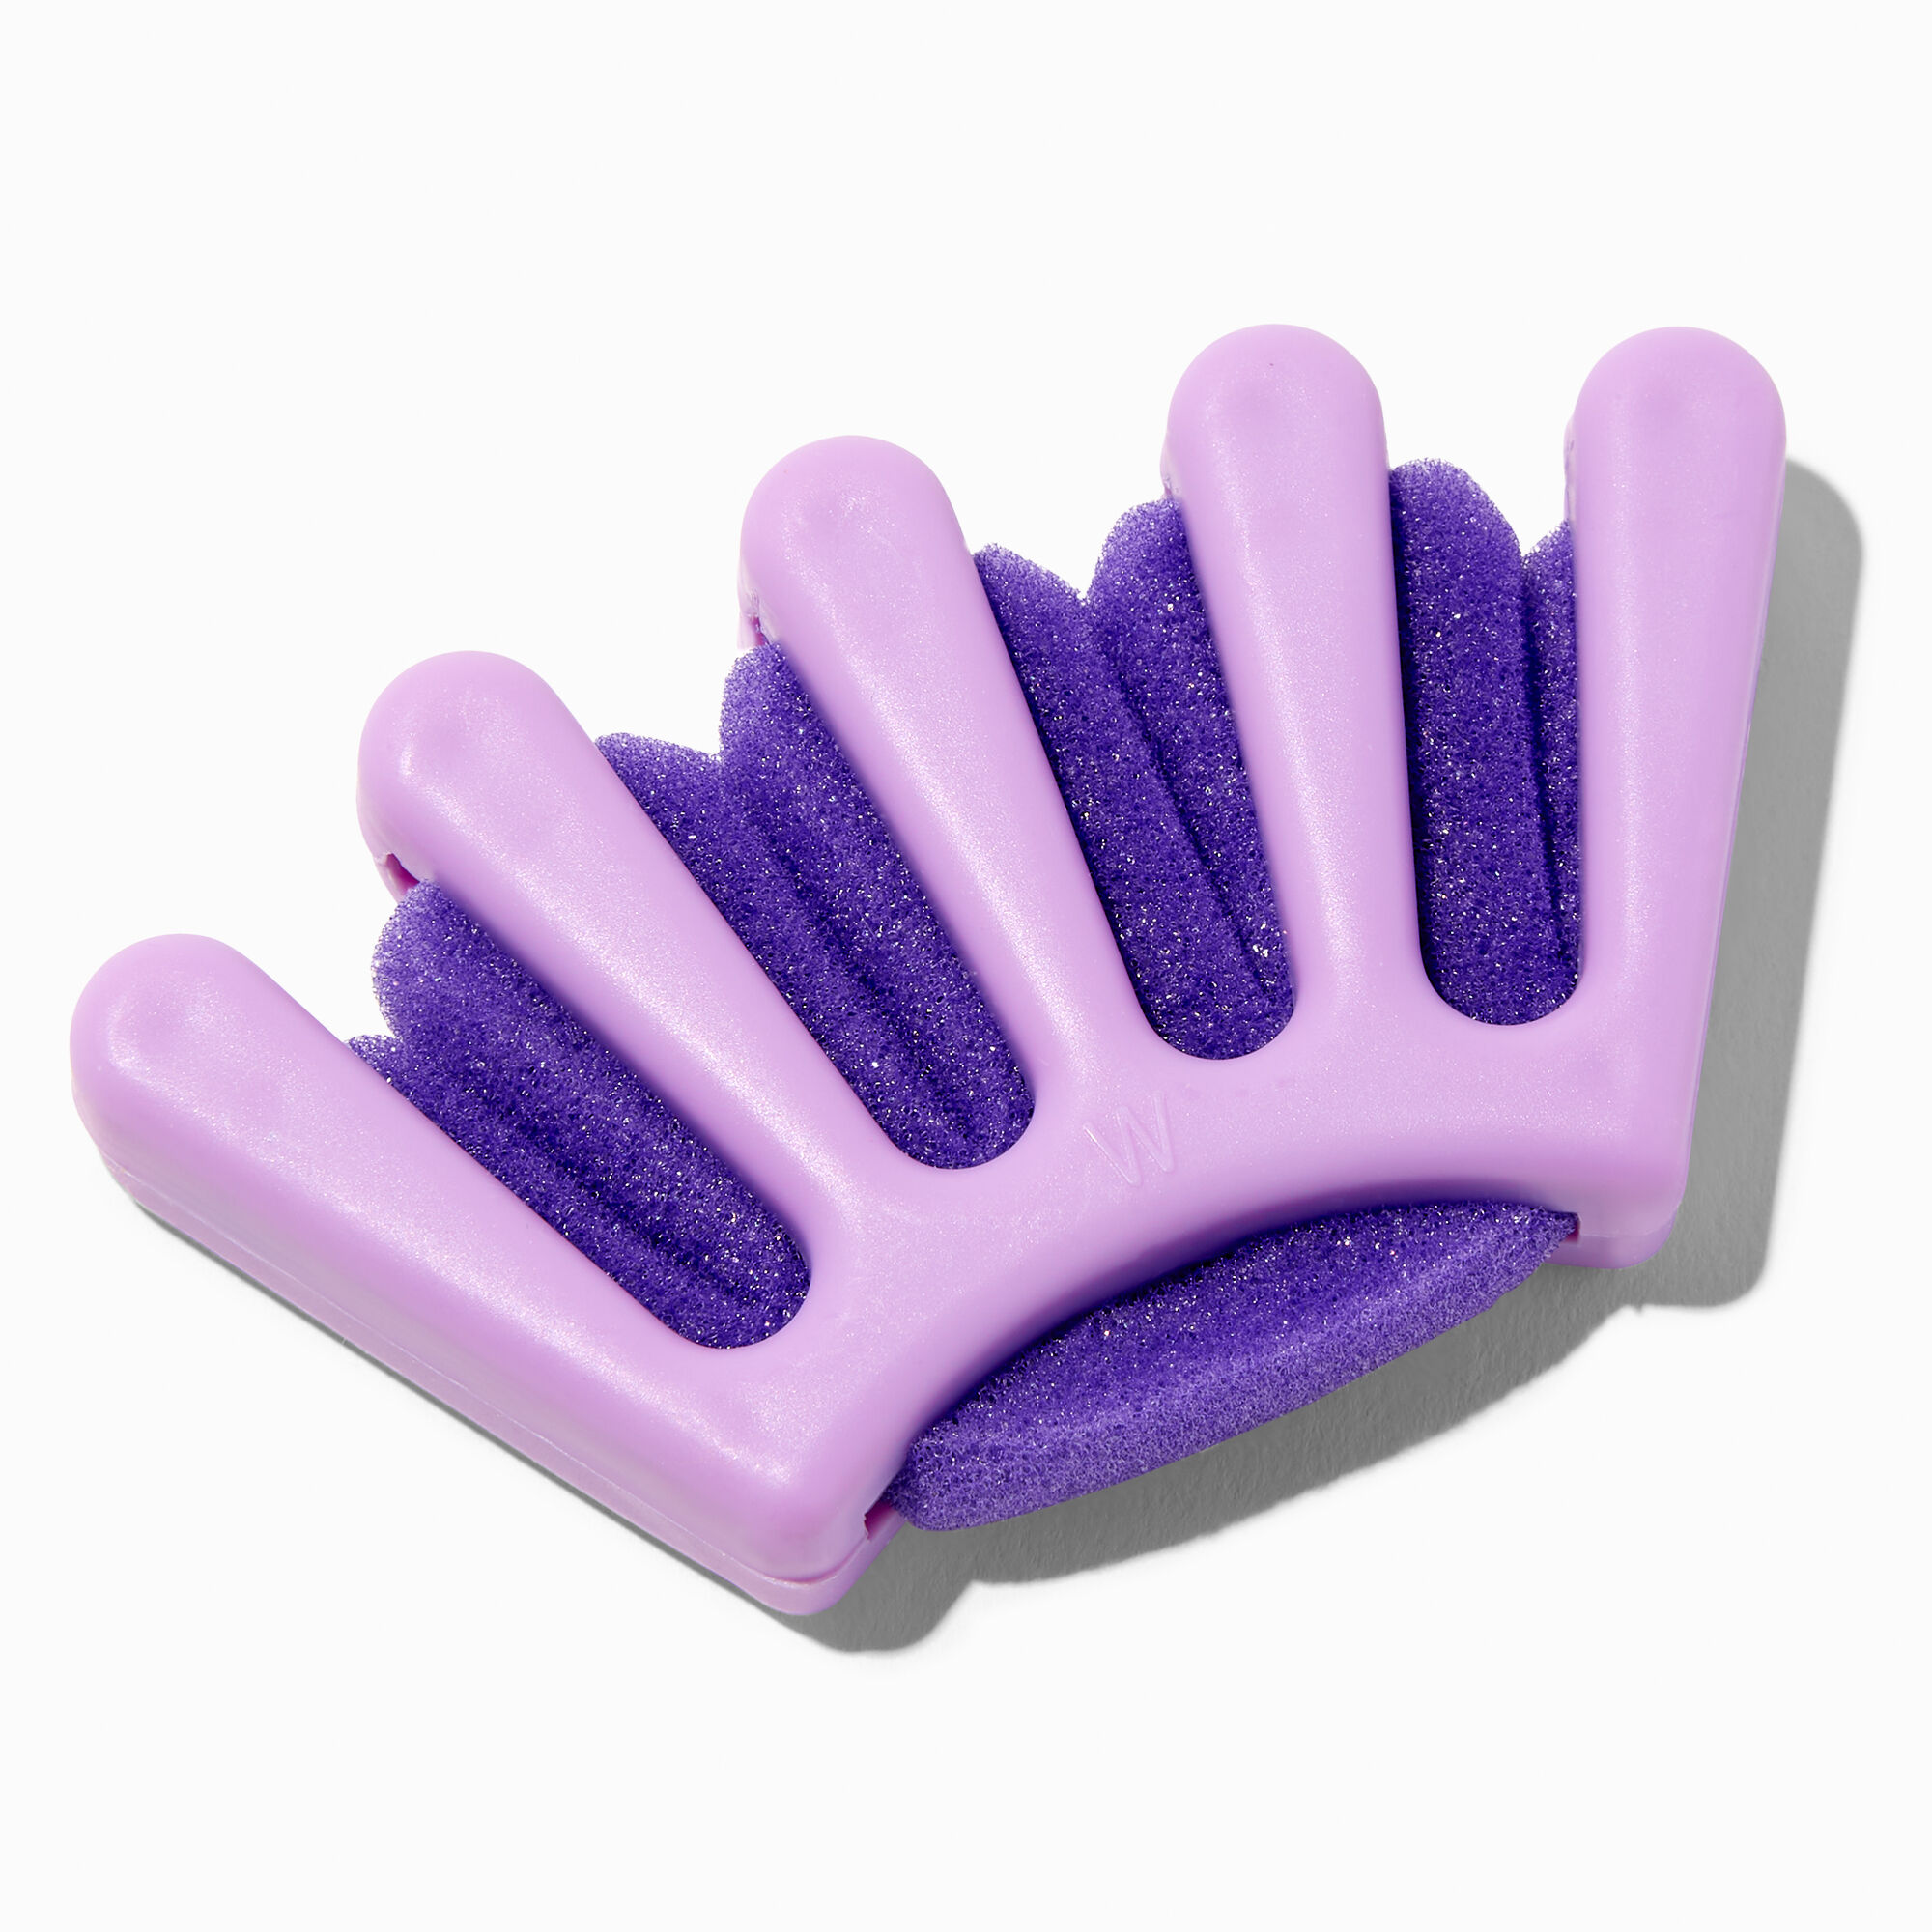 View Claires Hair Braiding Sponge Tool information